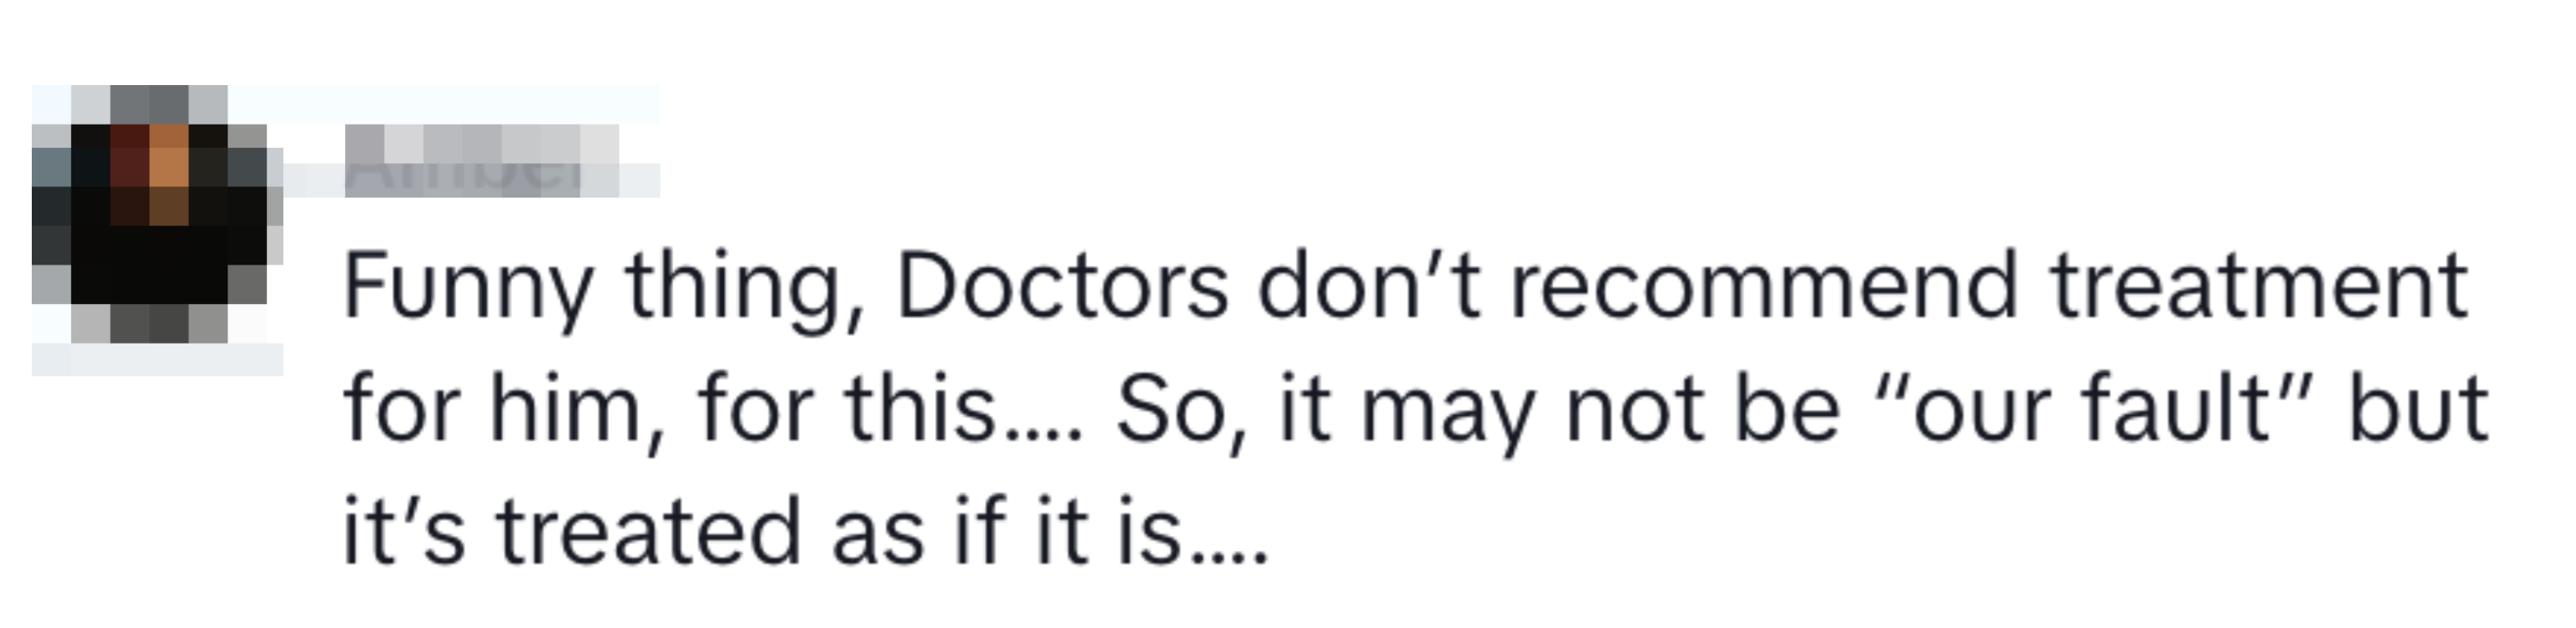 A comment reads: &quot;Funny thing, Doctors don’t recommend treatment for him, for this.... So, it may not be &#x27;our fault,&#x27; but it’s treated as if it is....&quot;